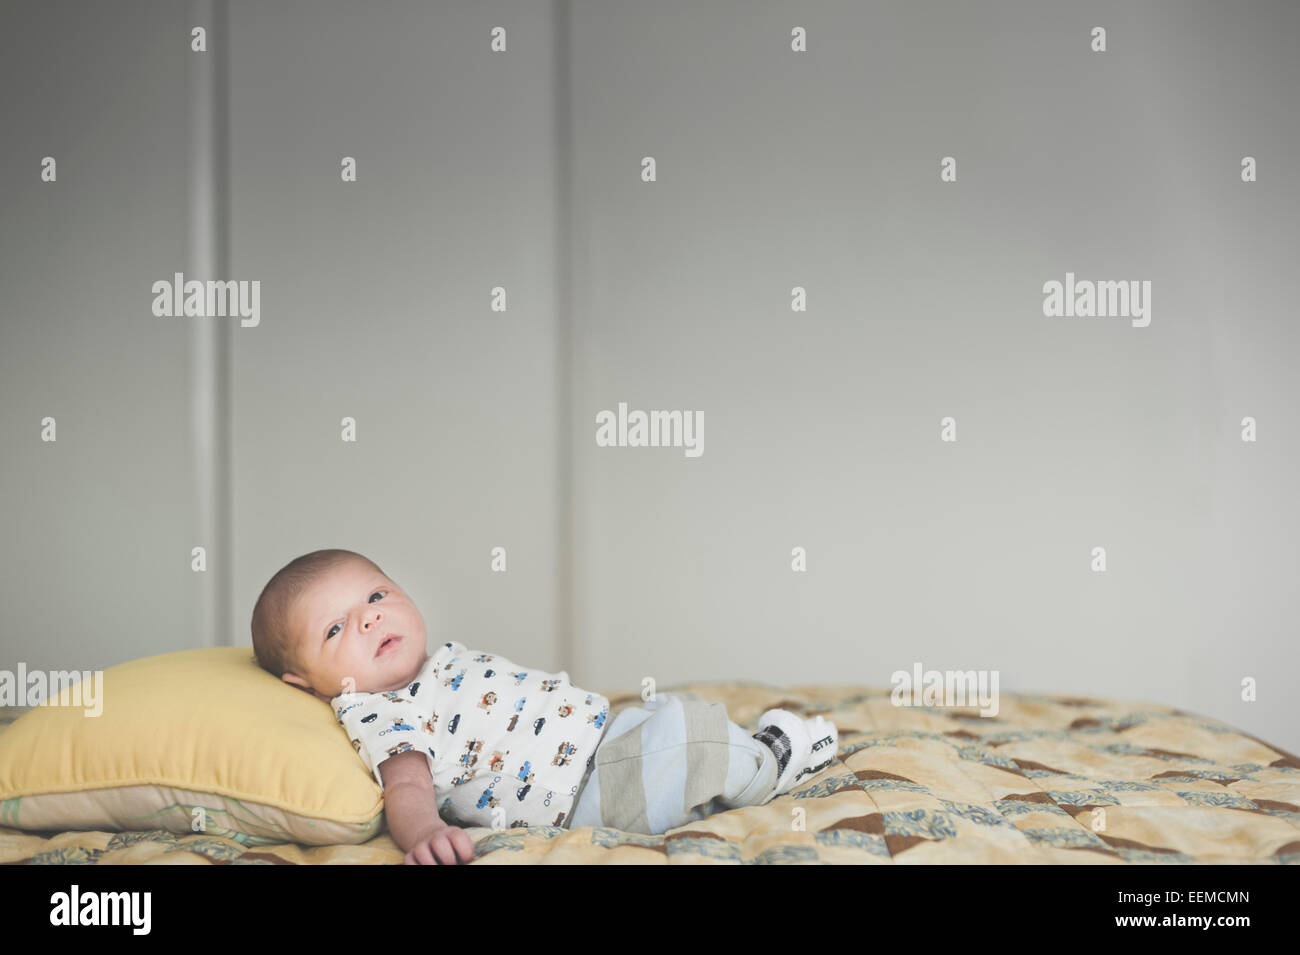 Newborn caucasian baby laying on bed Banque D'Images